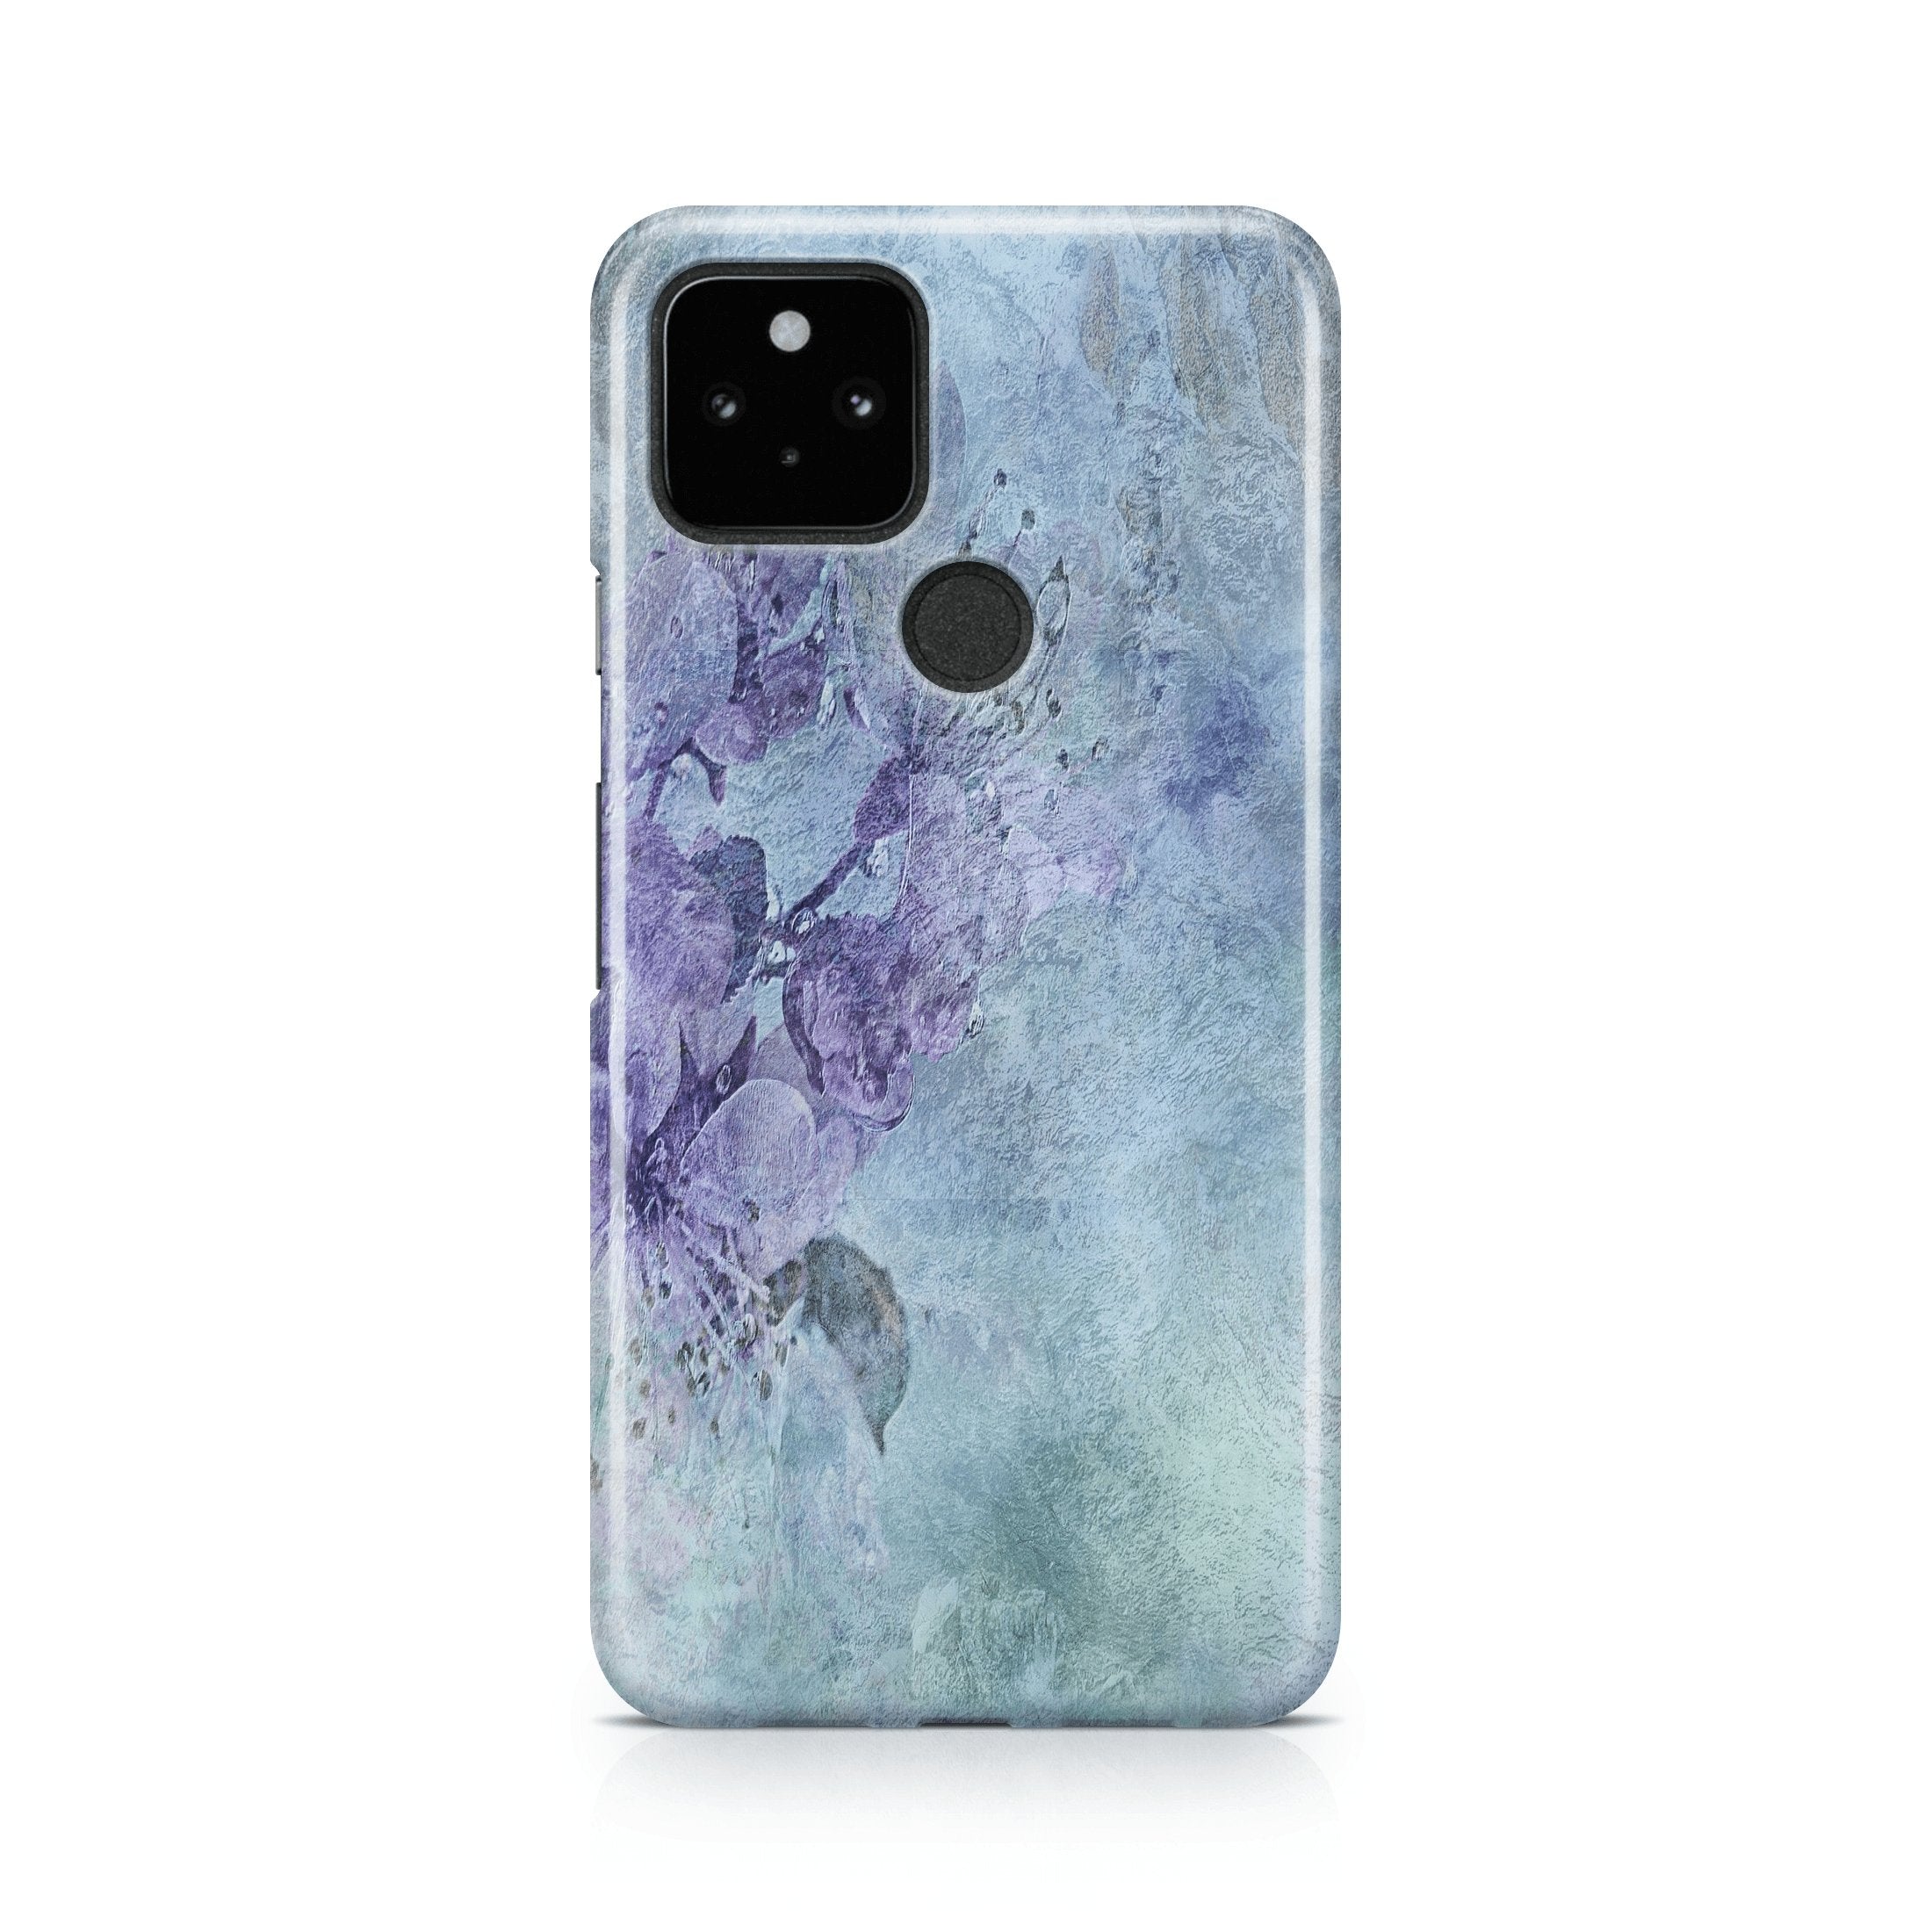 Spring Mist - Google phone case designs by CaseSwagger